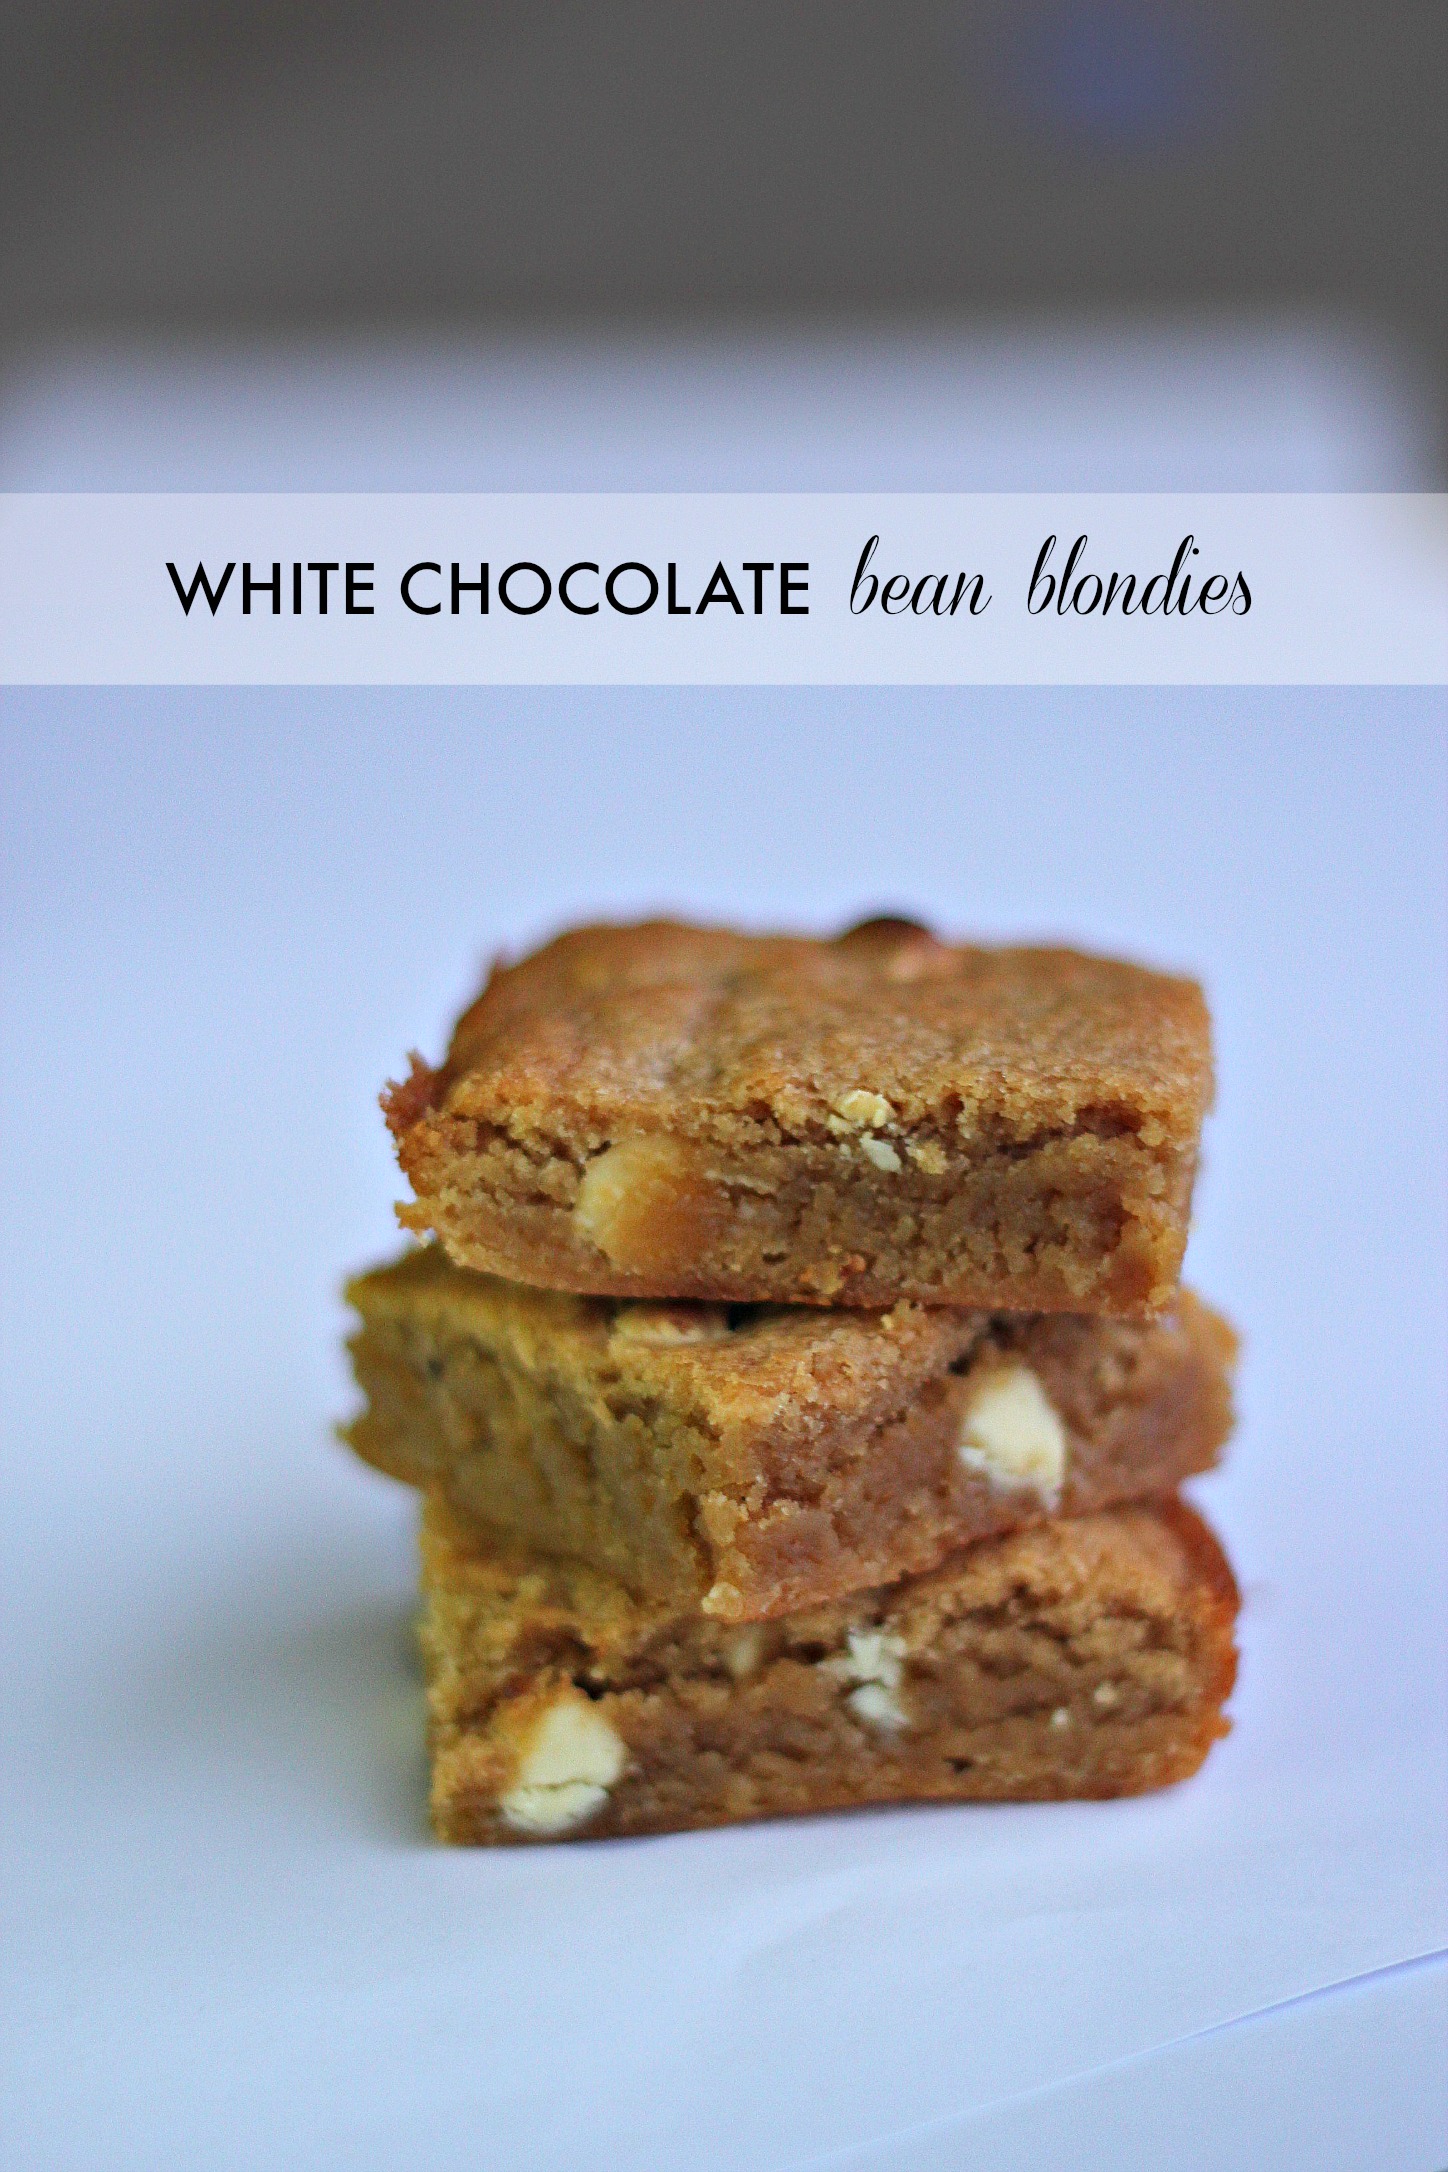 Beans In a white chocolate blondie Of course! Extra nutrition that you can't even taste.